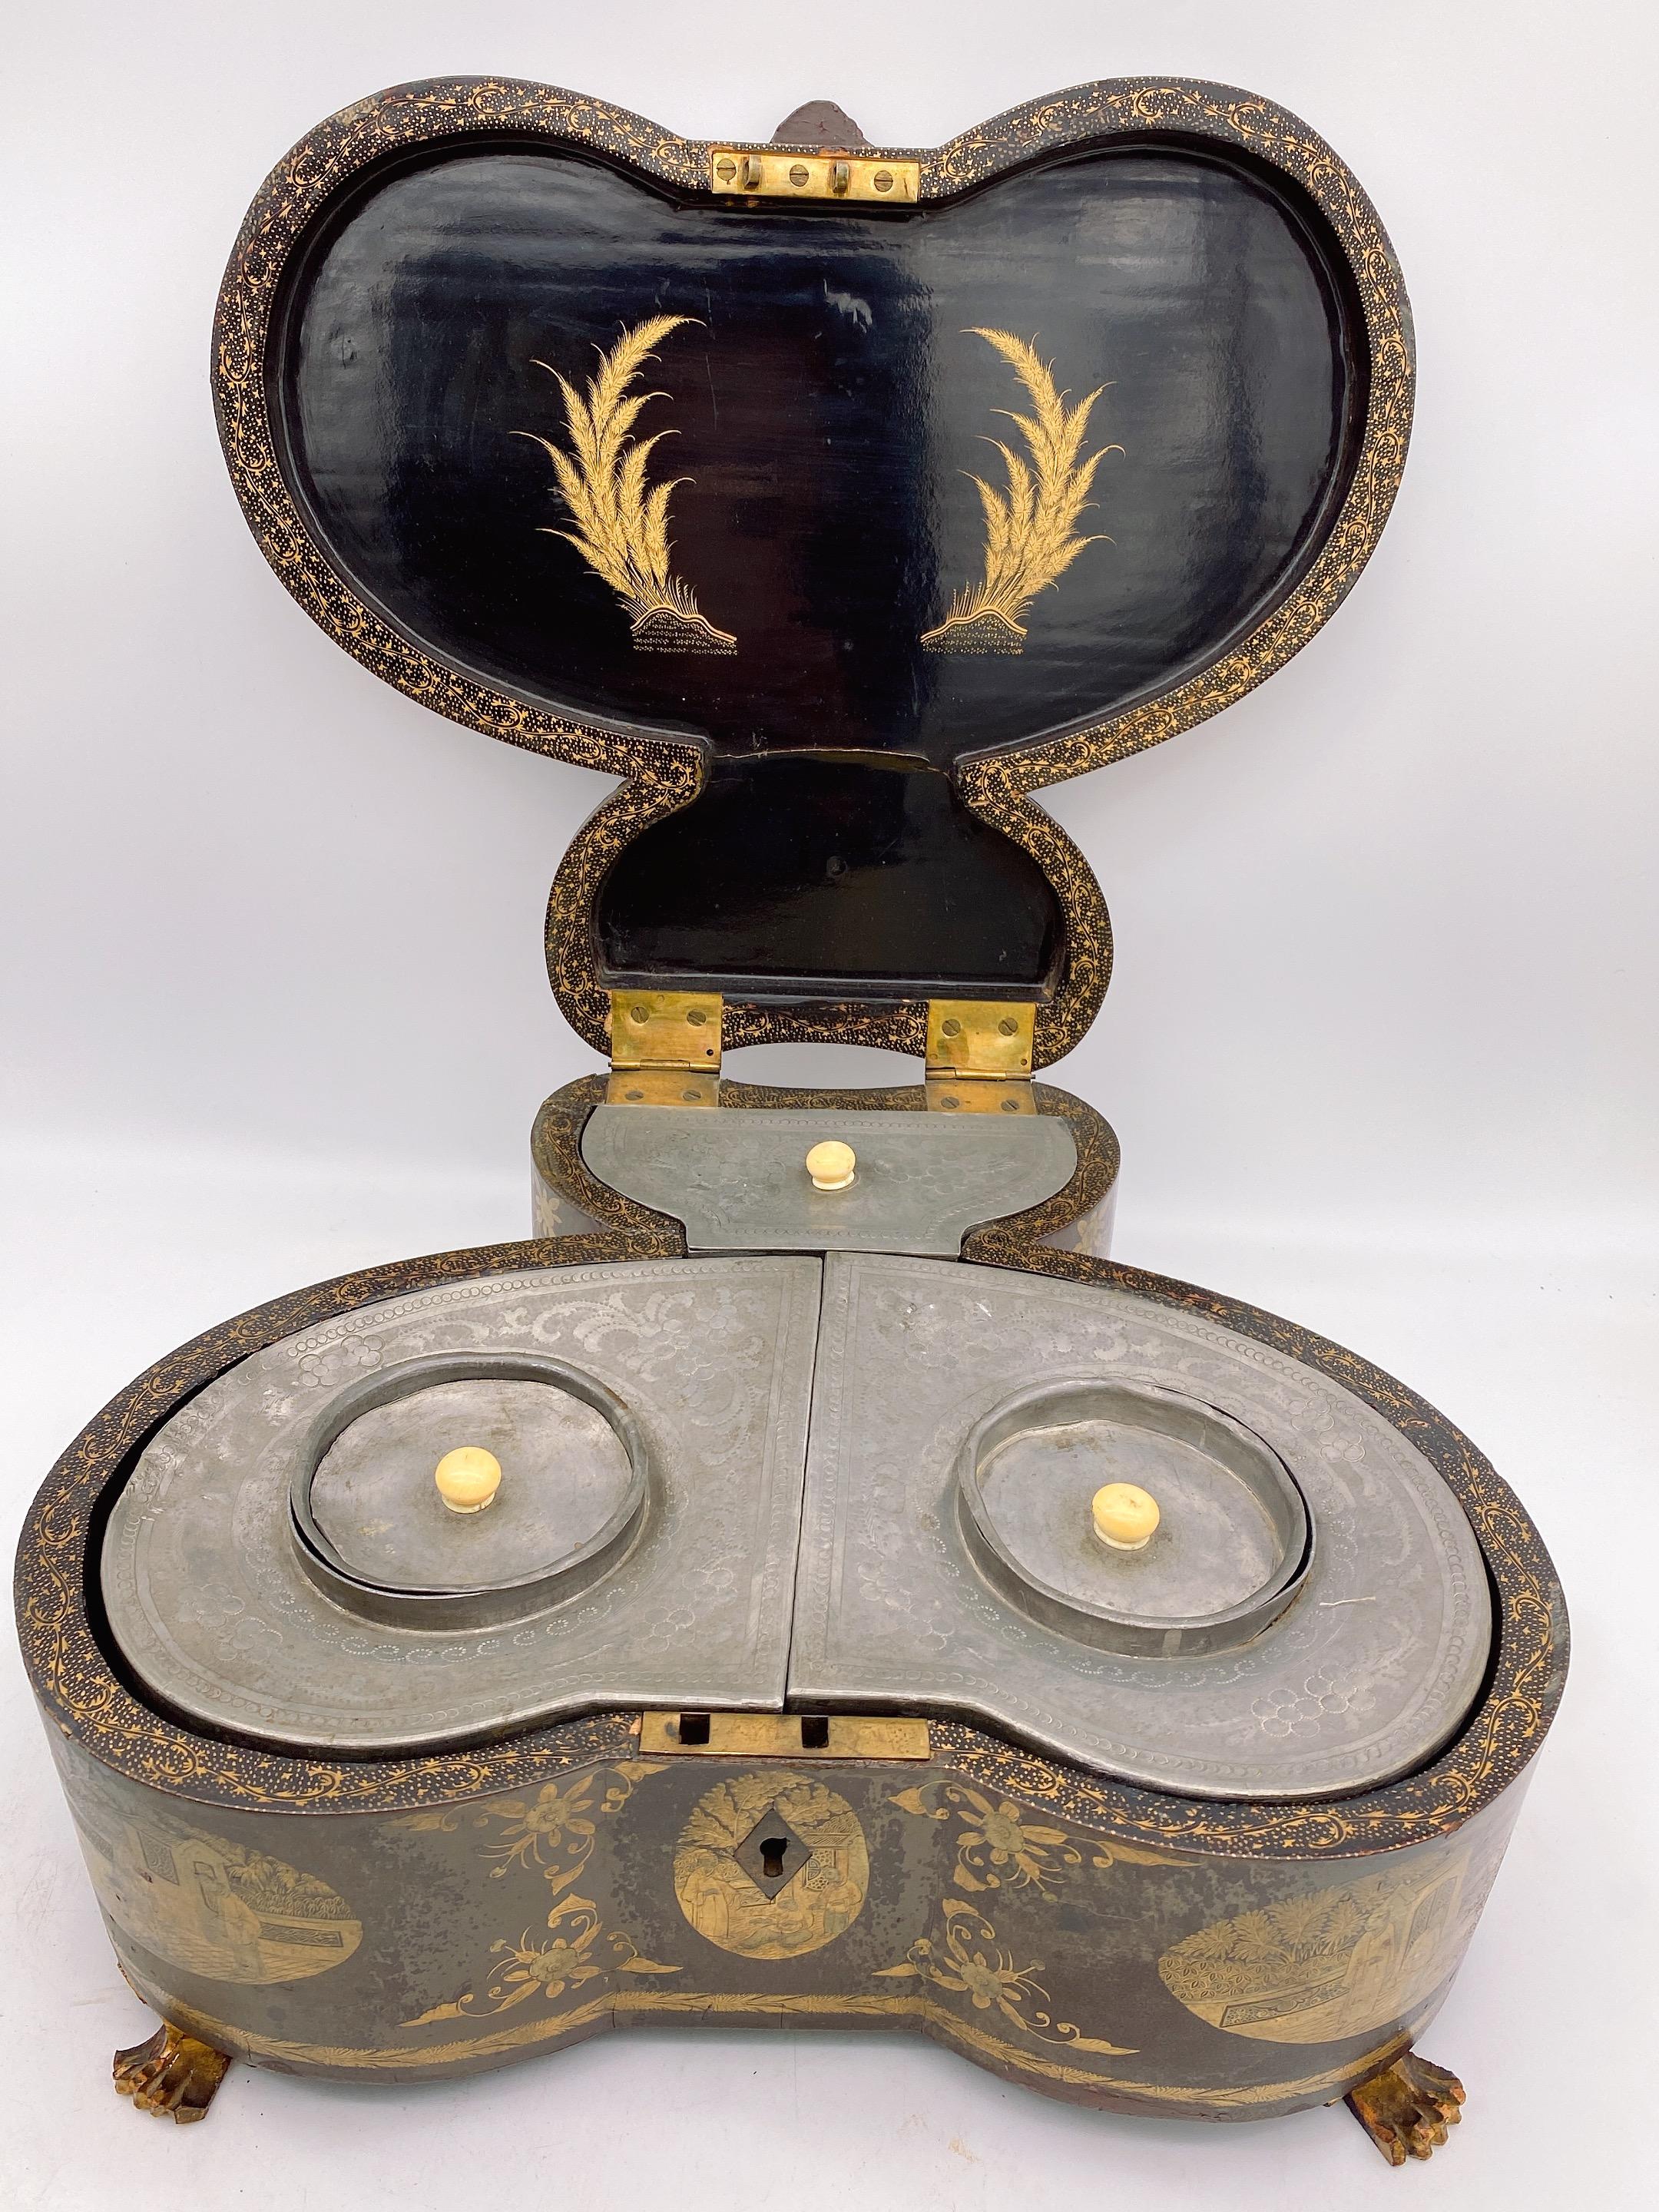 Rare 19th Century Antique Chinese Gilt Lacquer Butterfly Cased Pewter Tea Caddy For Sale 6